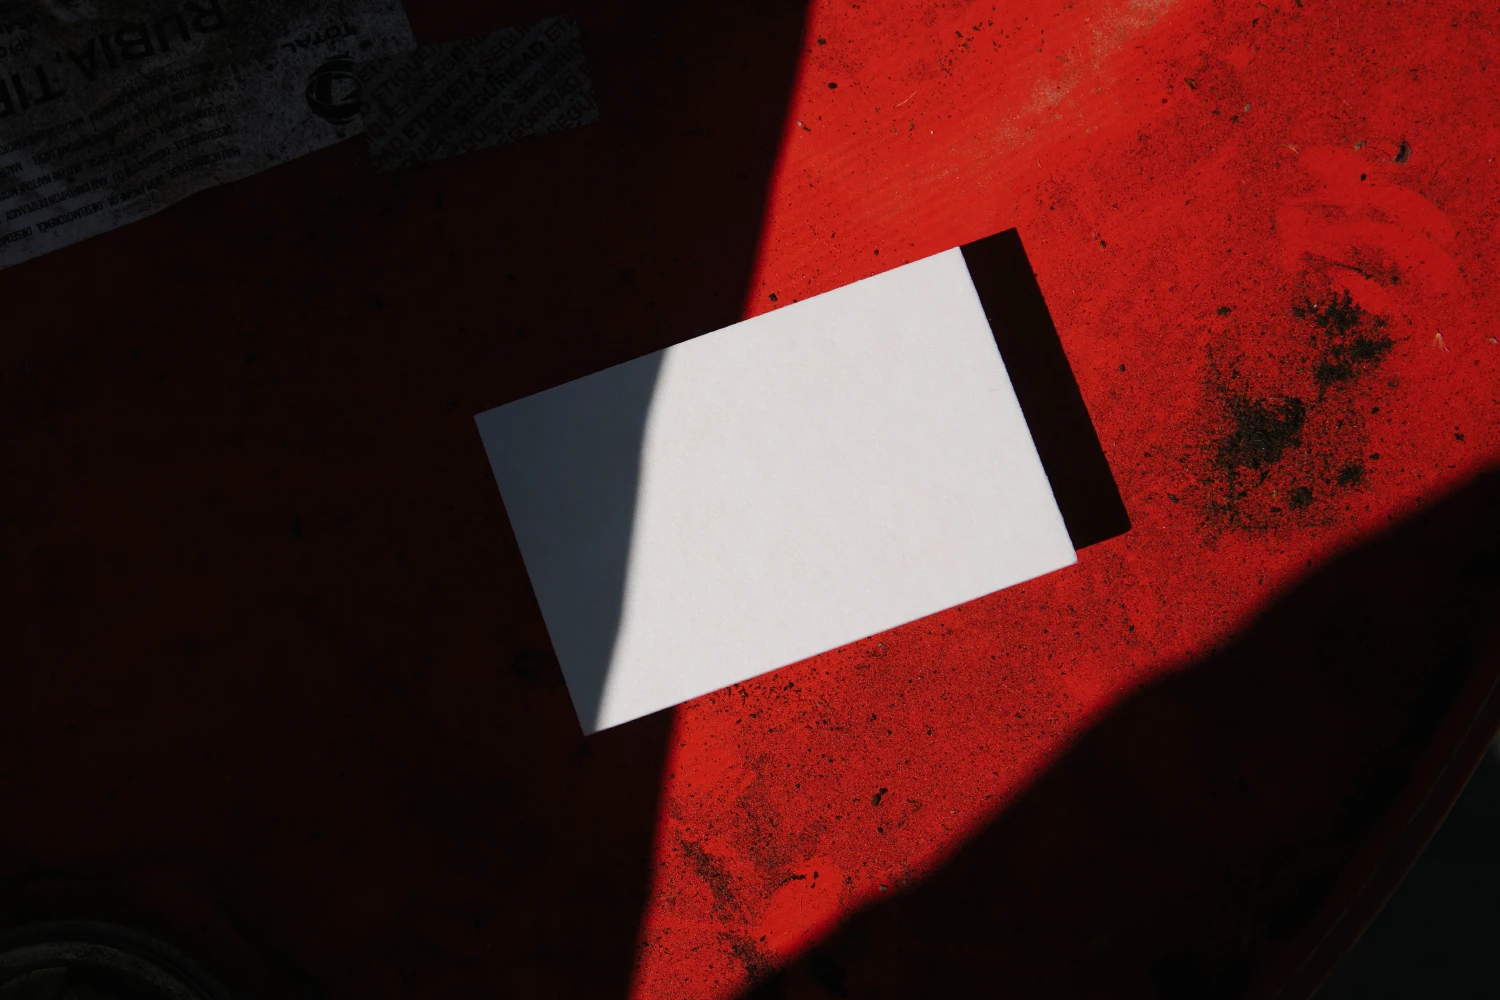 Creative business card mockup on a rusty barrel with a big contrast between light and shadows.